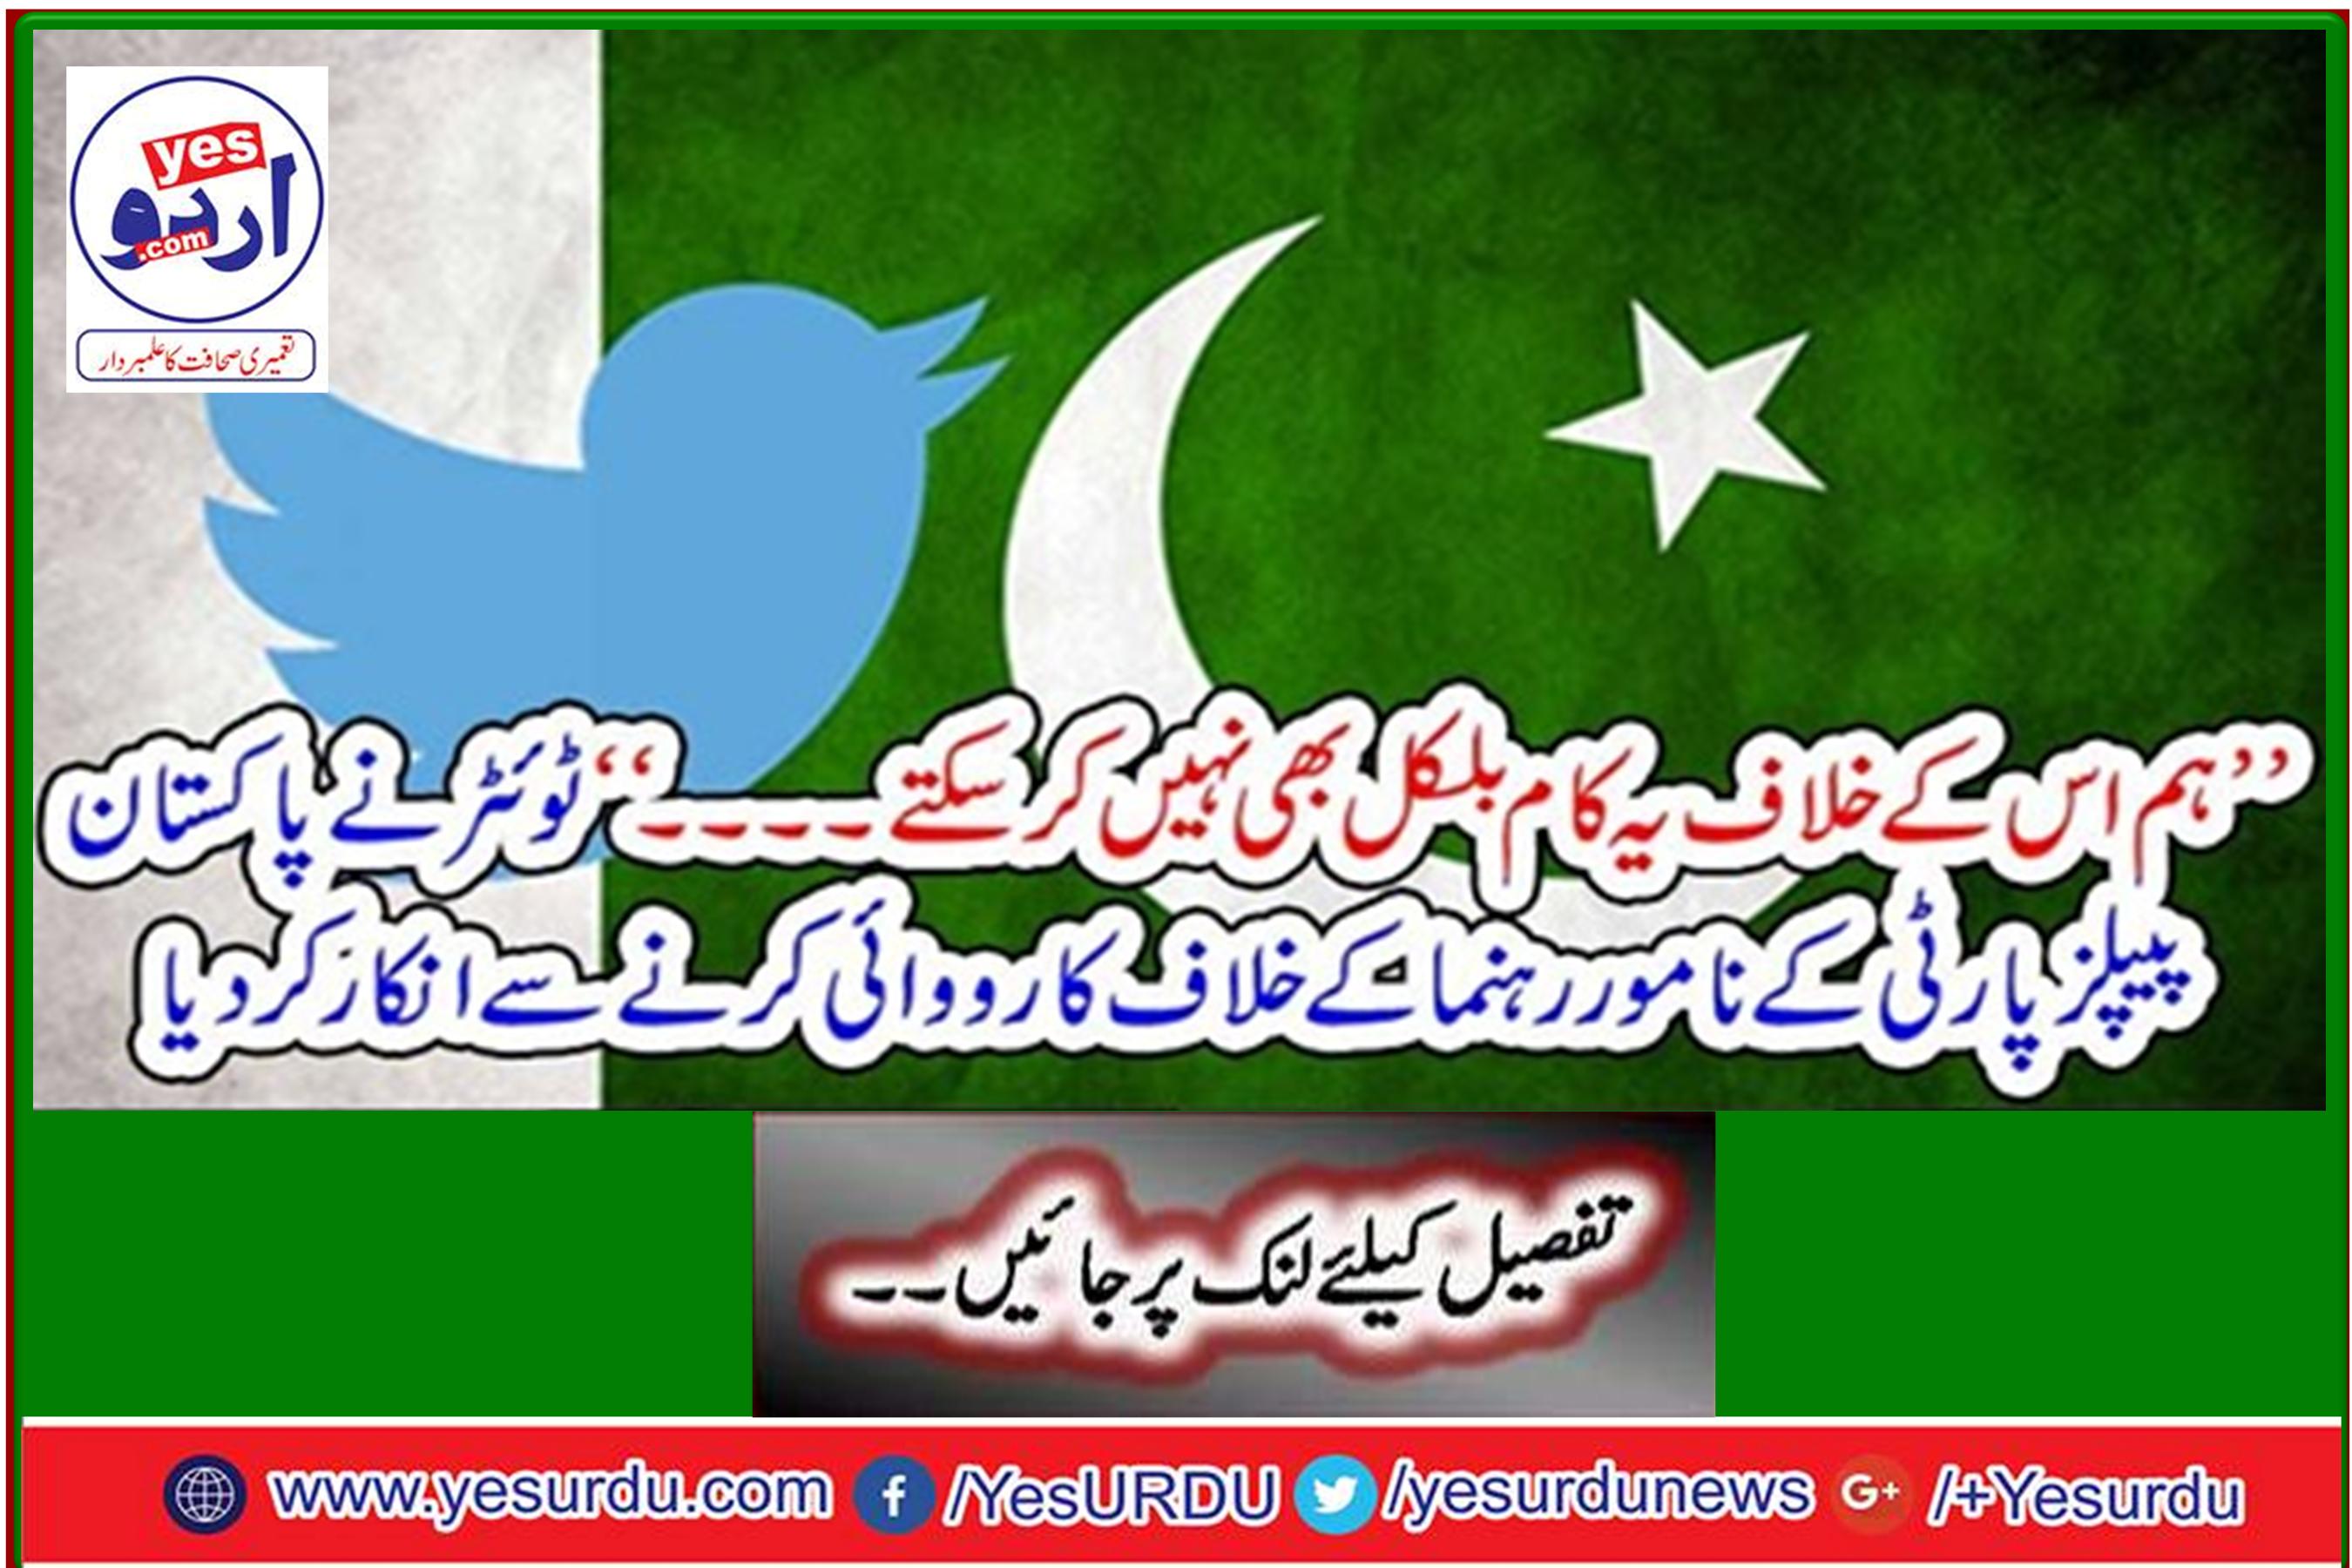 Twitter refused to take action against a prominent leader of the Pakistan Peoples Party